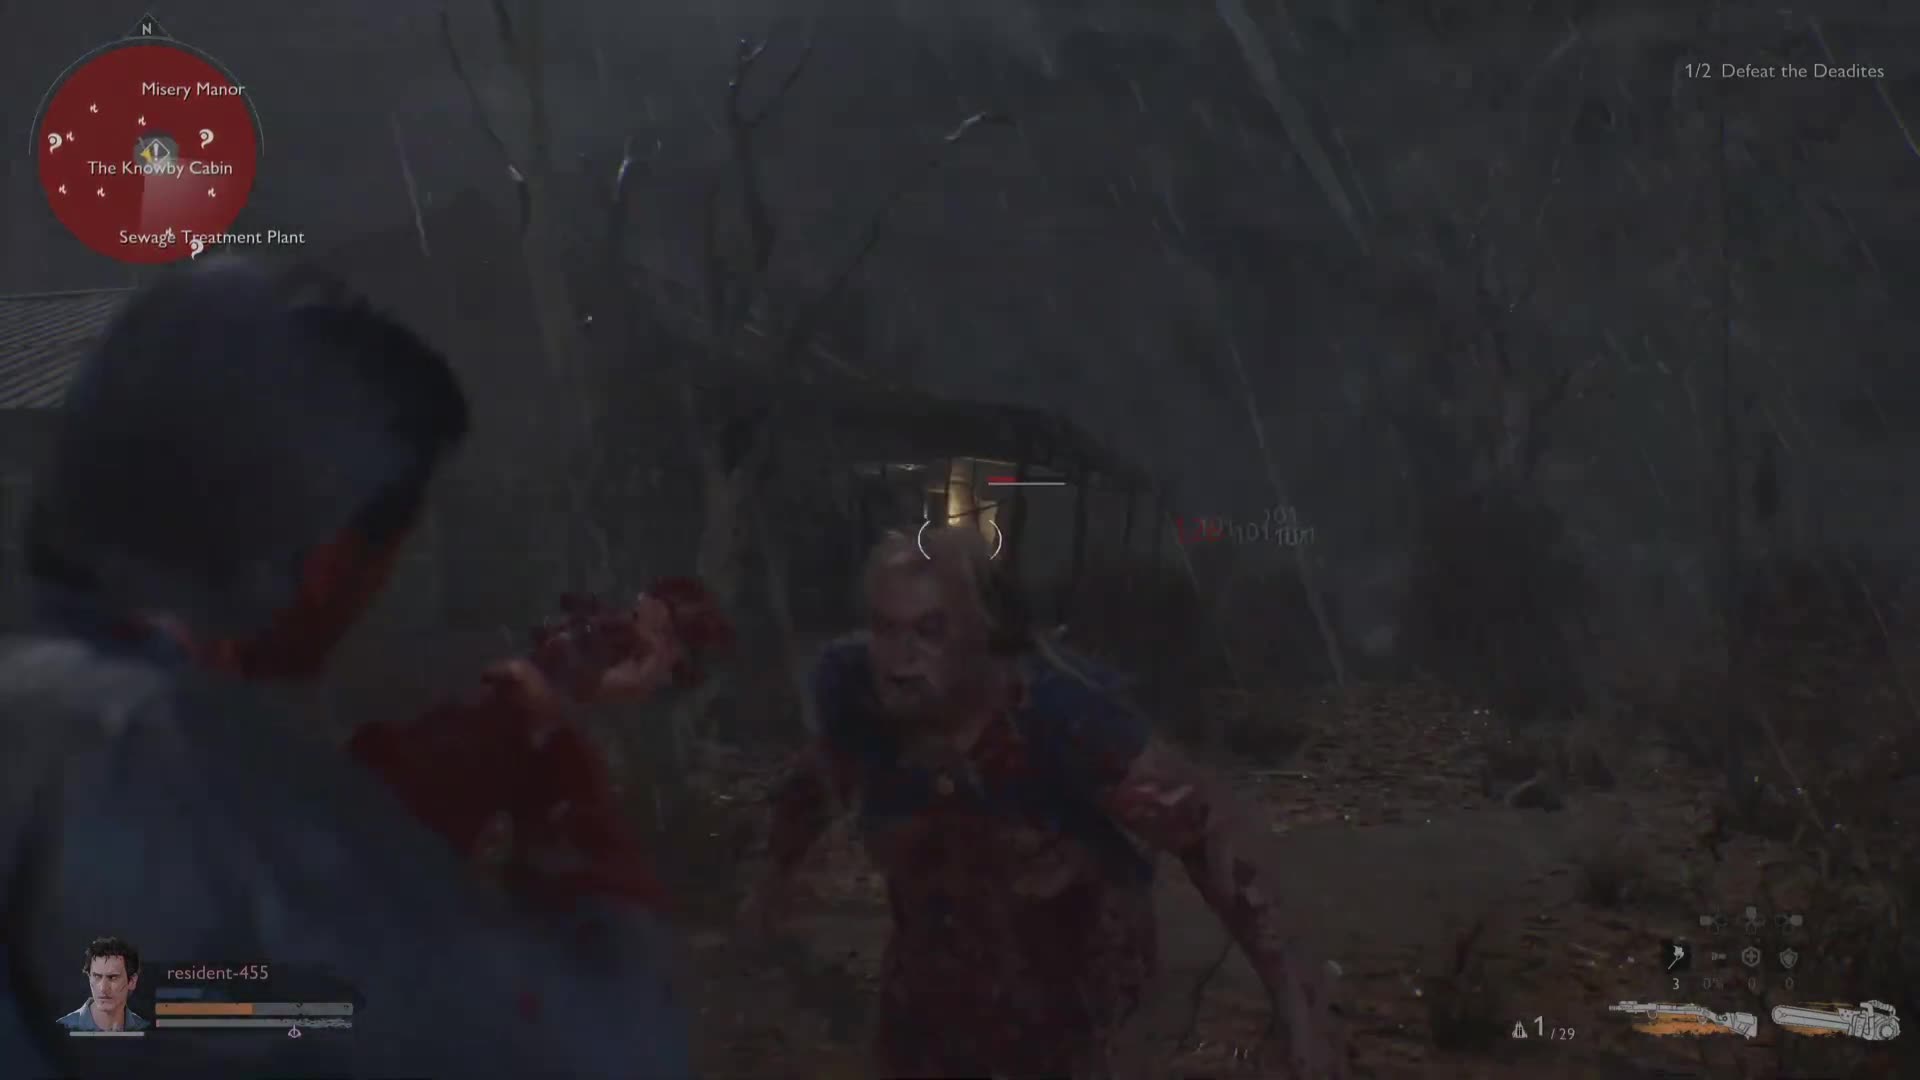 Evil Dead The Game If you love someone set them free with a chainsaw